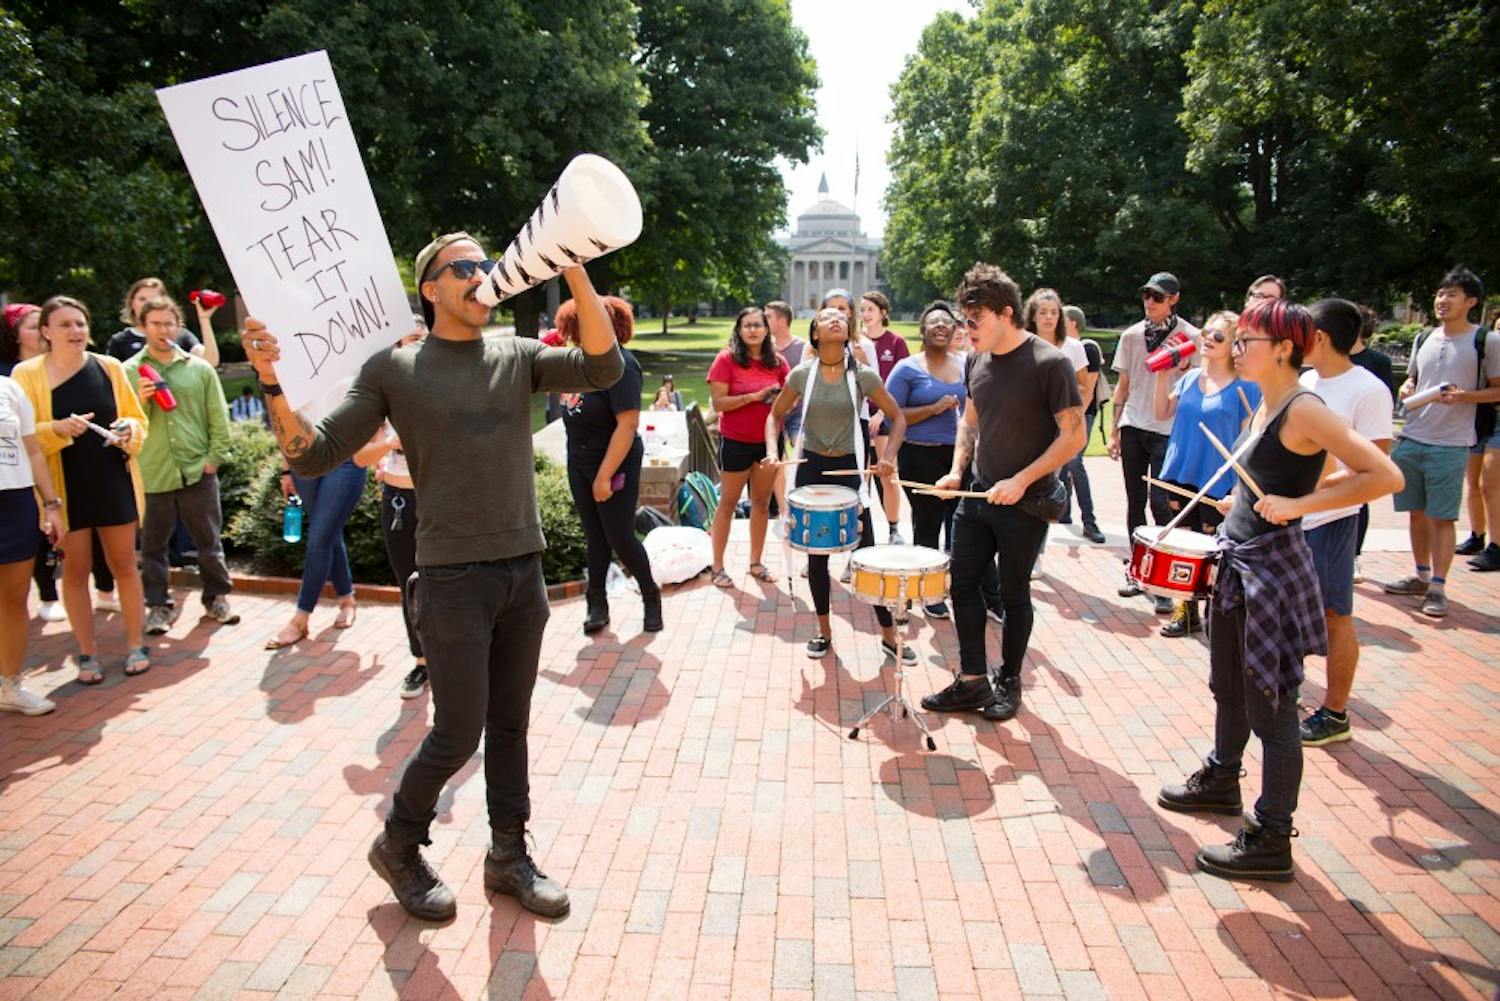 A noise demonstration was held outside South Building on Wednesday afternoon. Demonstrators used drums, pots, pans and noise makers to protest the Silent Sam statue on campus.&nbsp;